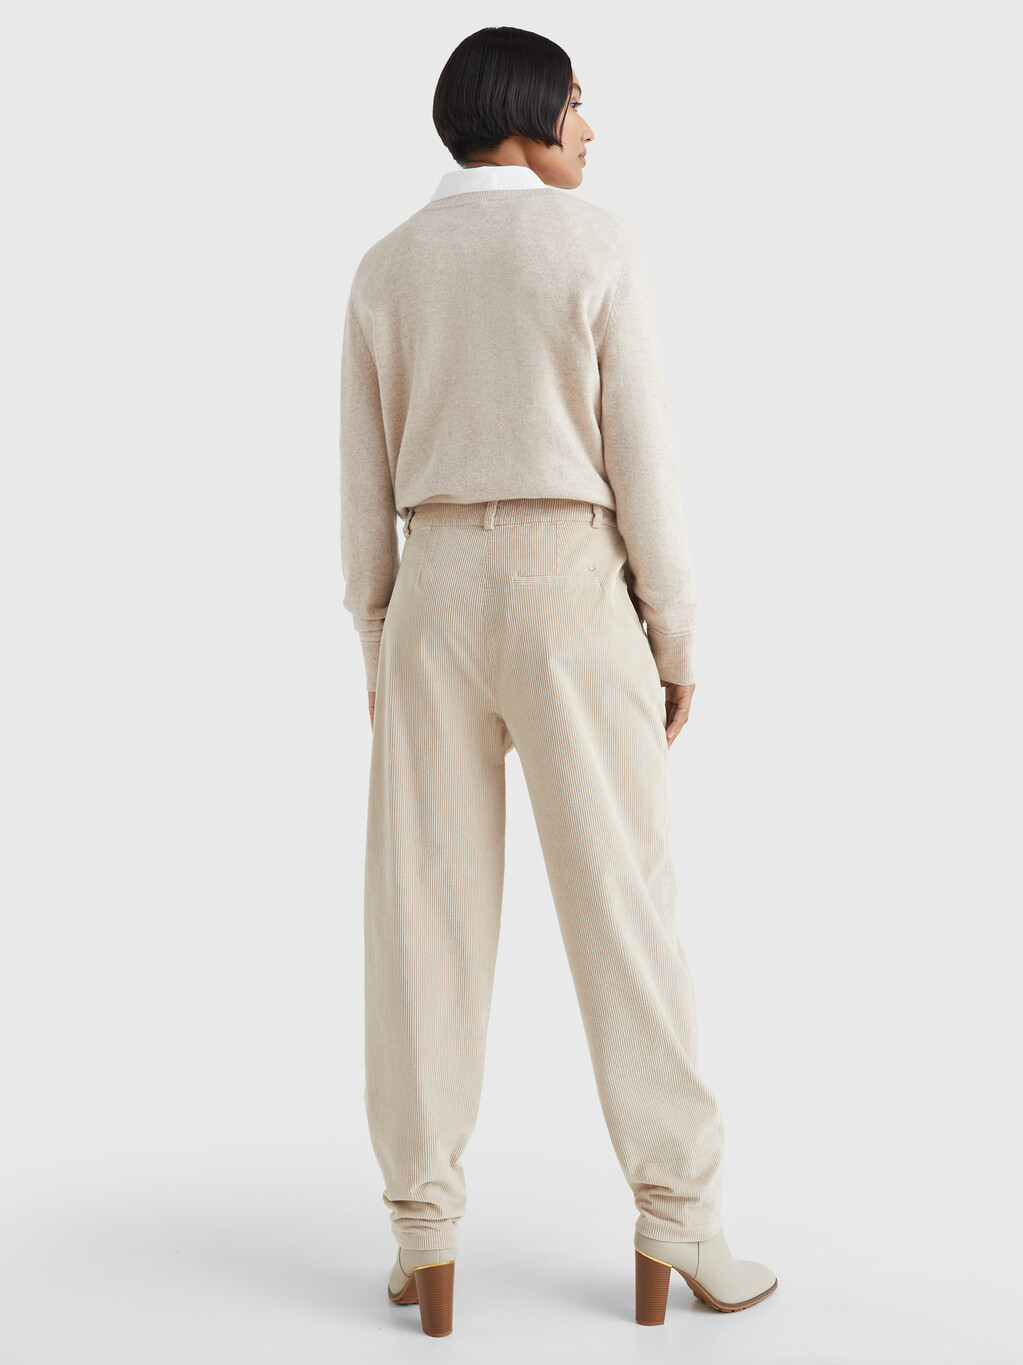 Tapered Corduroy Trousers, White Clay, hi-res